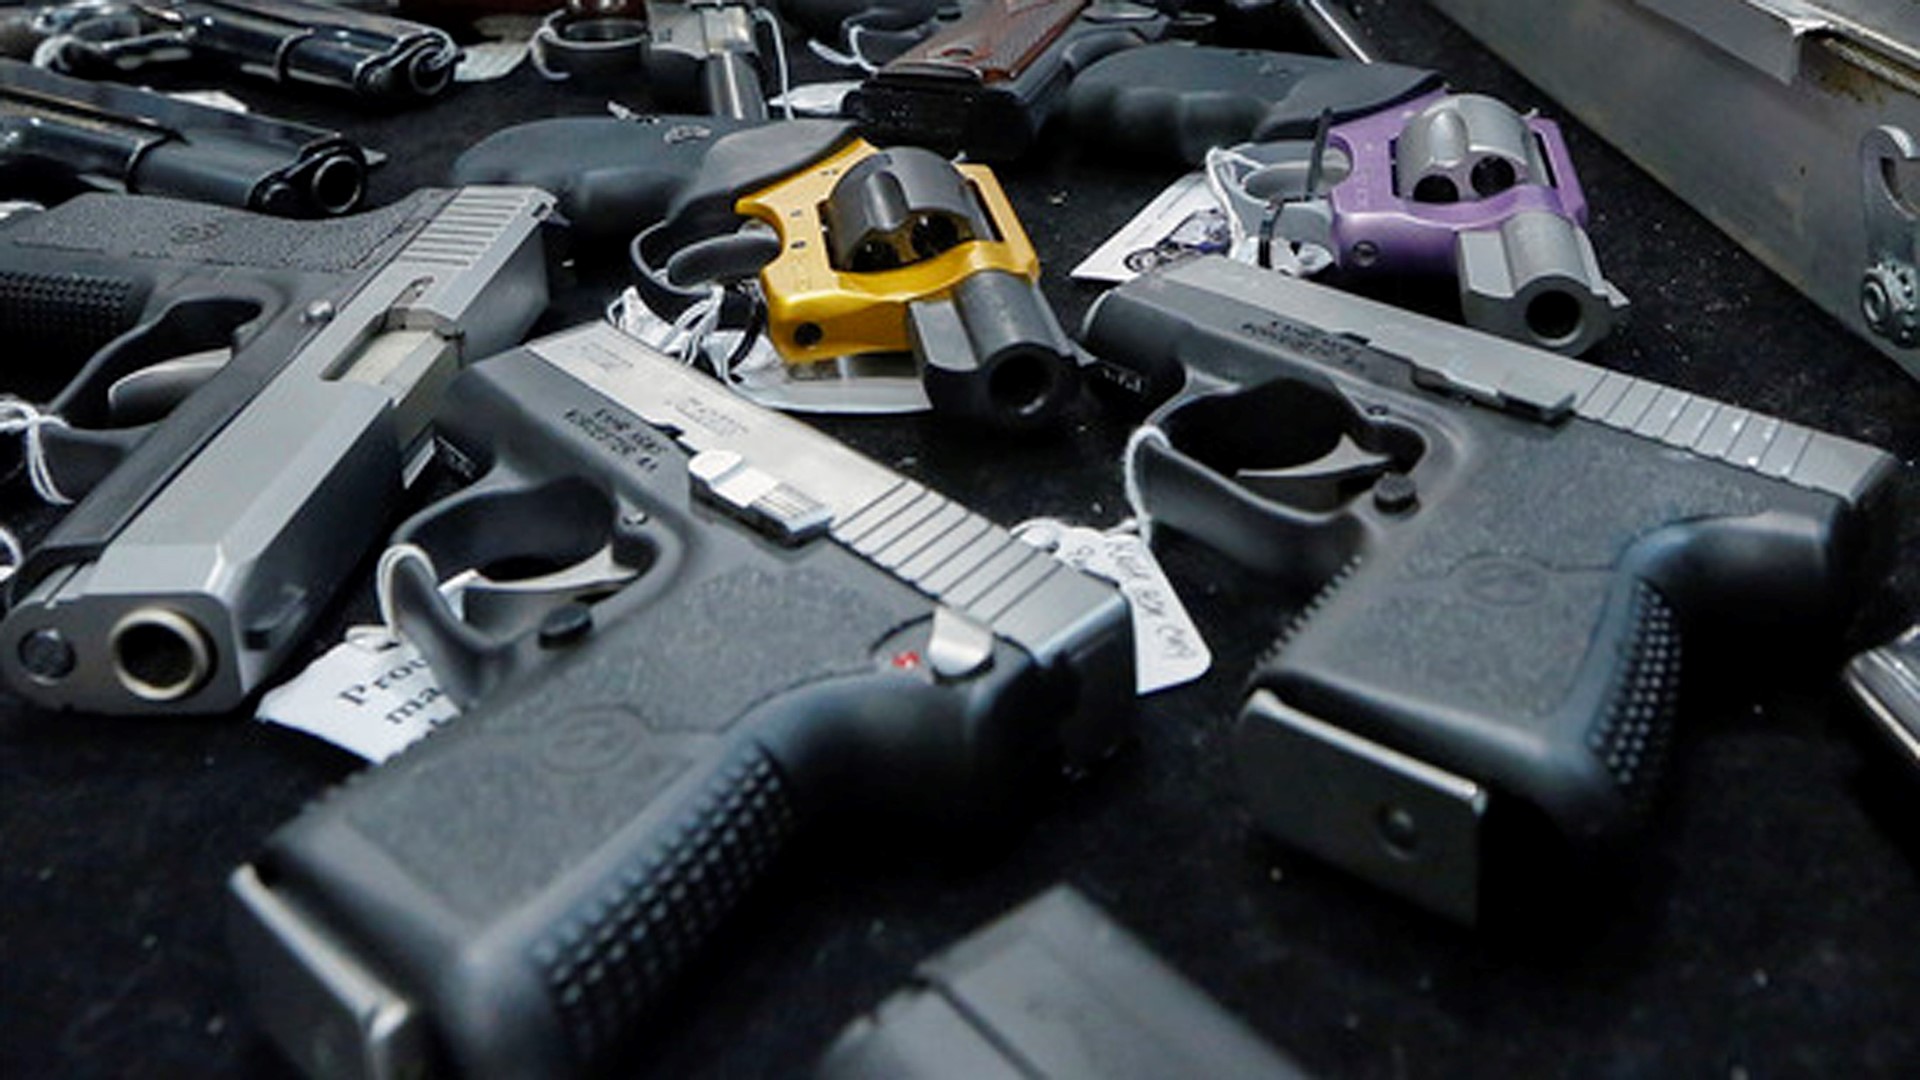 Iowans can now buy handguns from private, unlicensed sources without a permit. Here's how this affects government revenue and the legal system.